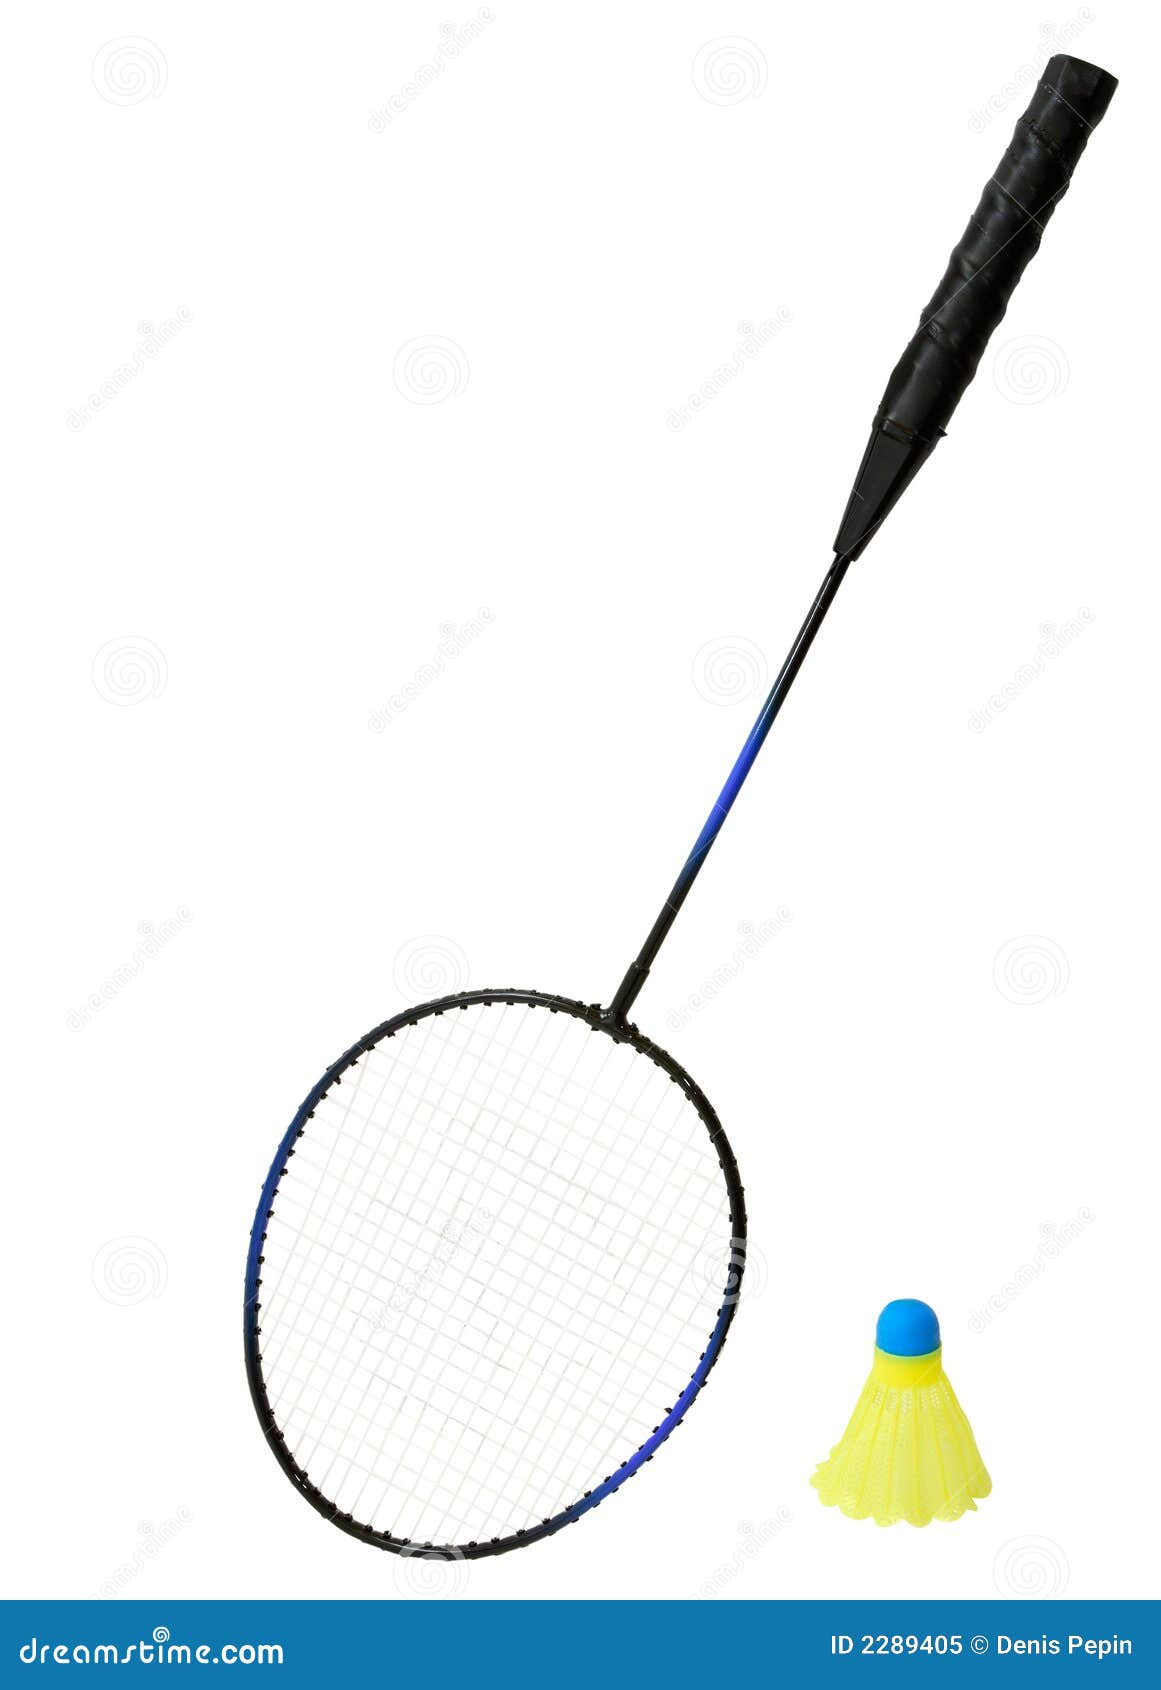 Badminton Racket And A Birdie Stock Image - Image of ...